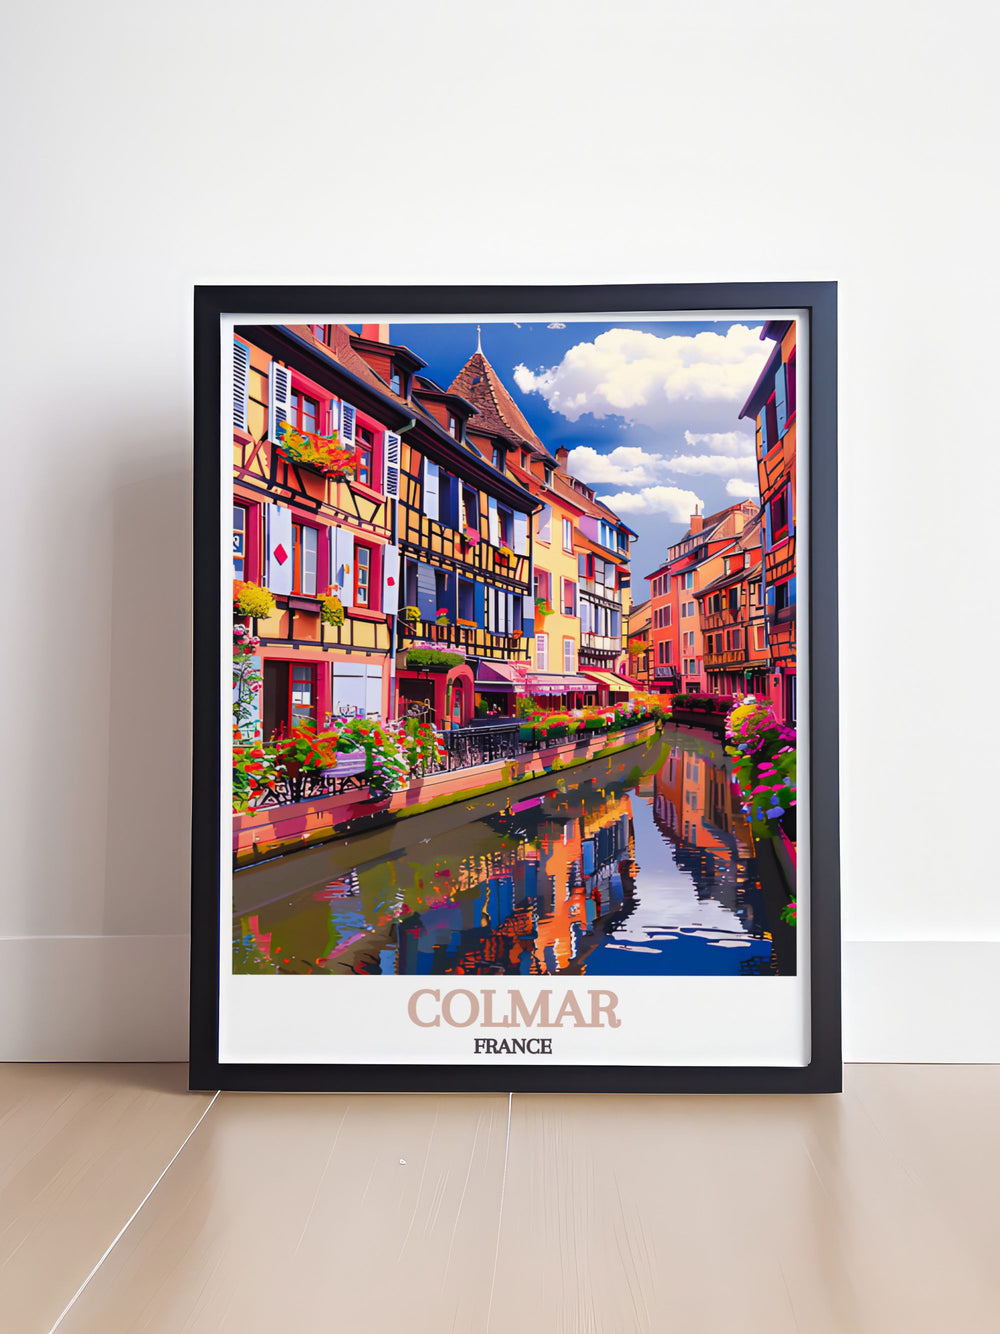 Admire La Petite Venises serene canals in Colmar, offering tranquil boat rides and historic views of colorful houses.